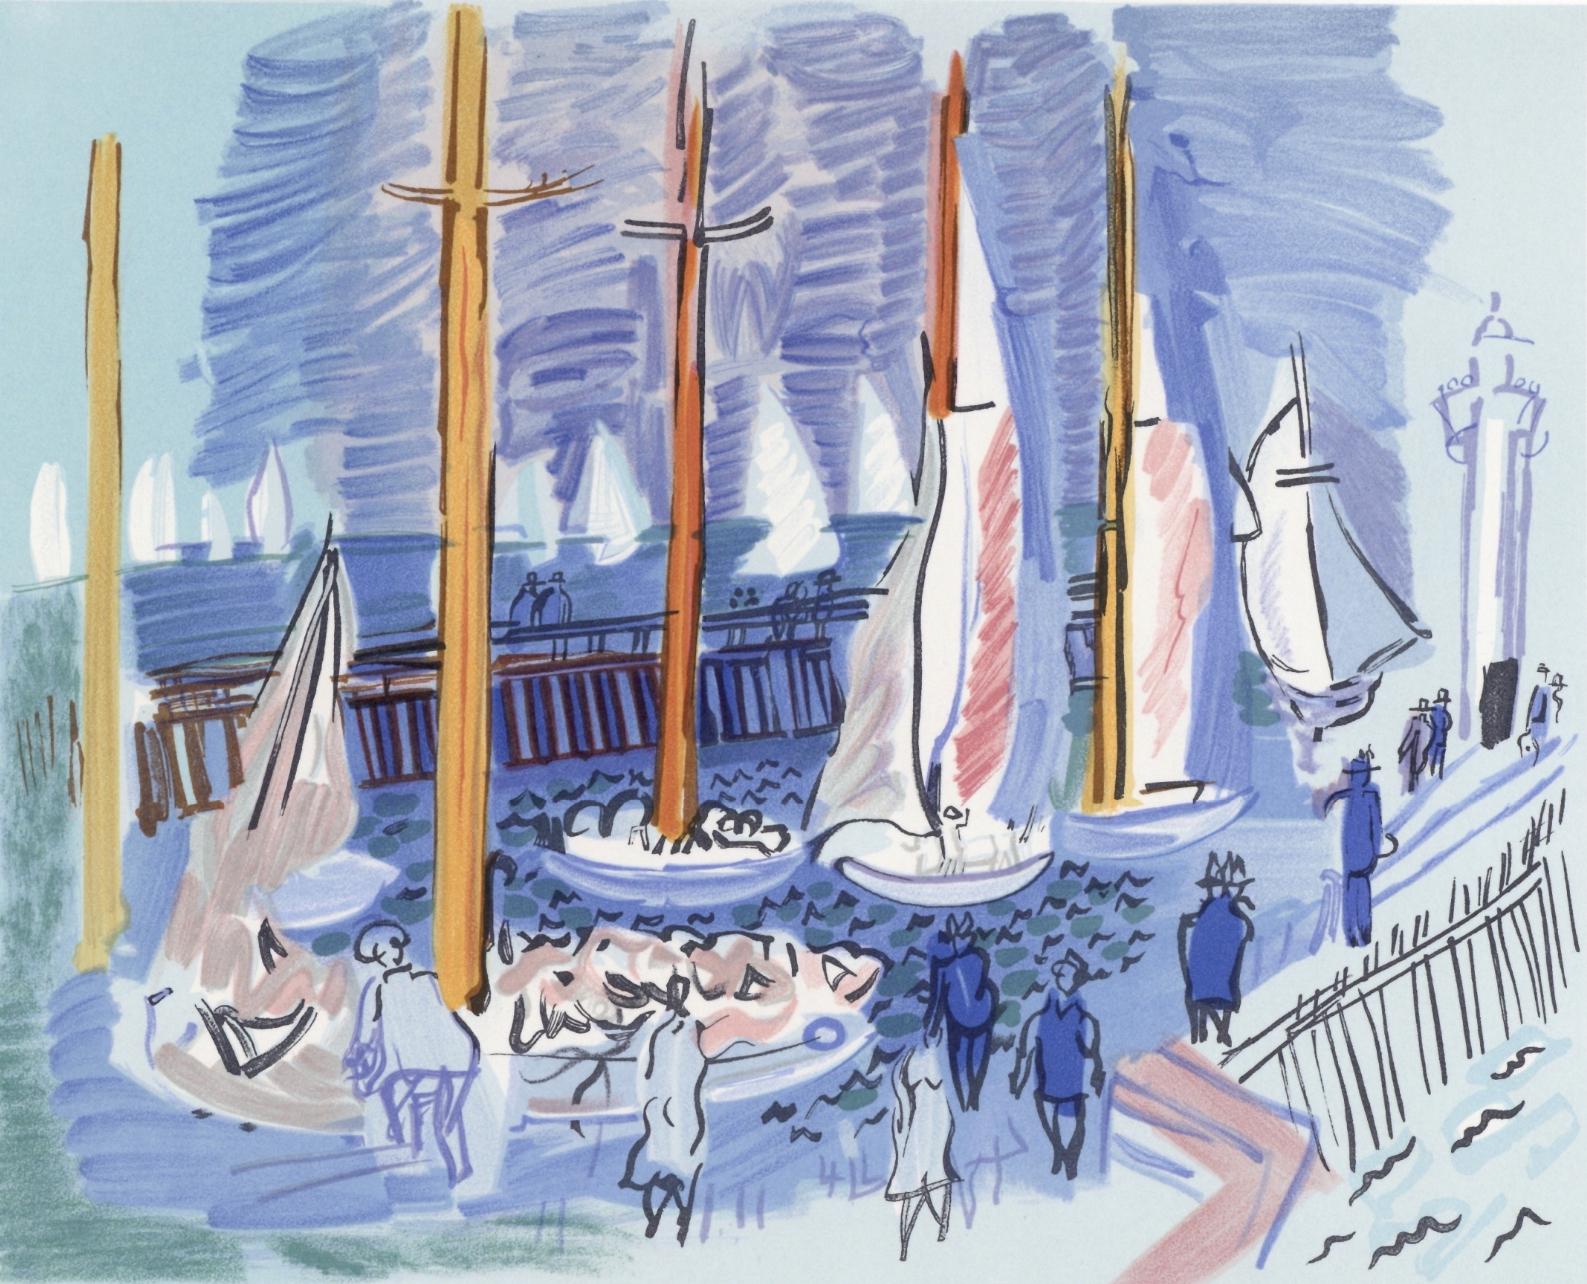 Lithograph on vélin d'Arches Arjomari paper. Unsigned and unnumbered, as issued. Good condition. Notes: From the folio, Lettre à mon peintre Raoul Dufy, 1965. Published by Librairie académique Perrin et Cie, Paris; printed by Fernand Mourlot, Paris,